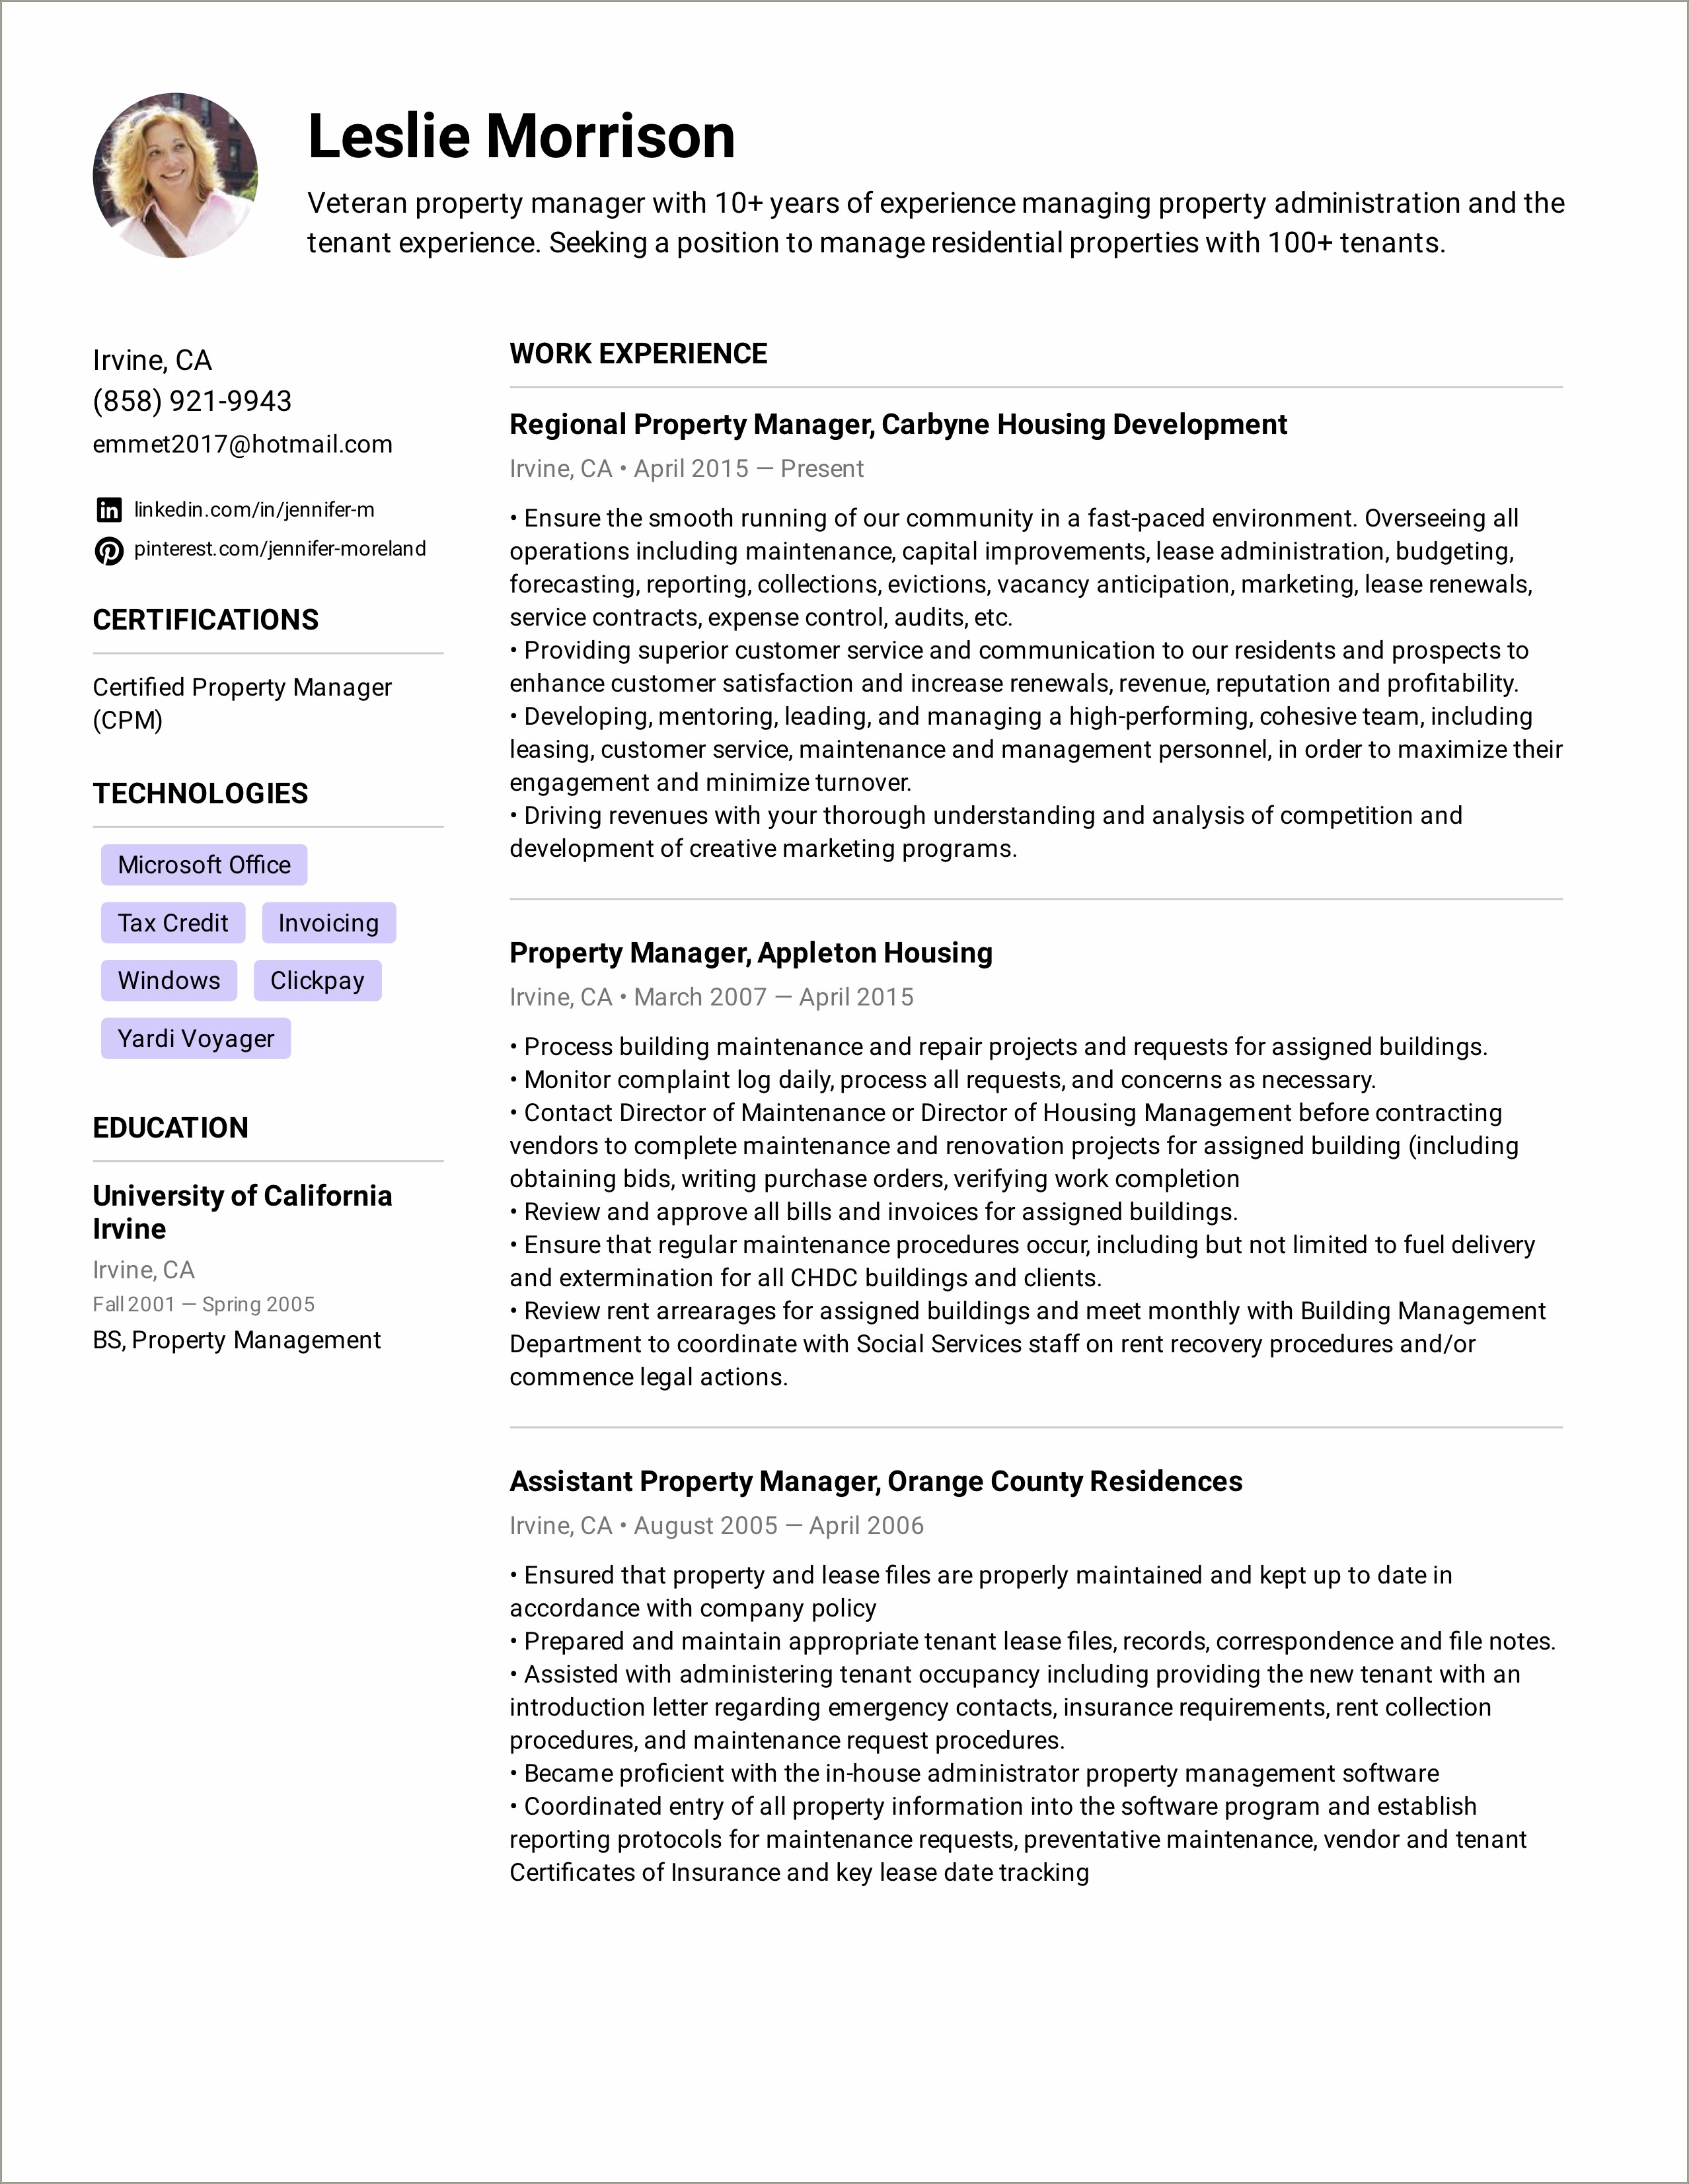 Sample Resume For Real Estate Office Manager